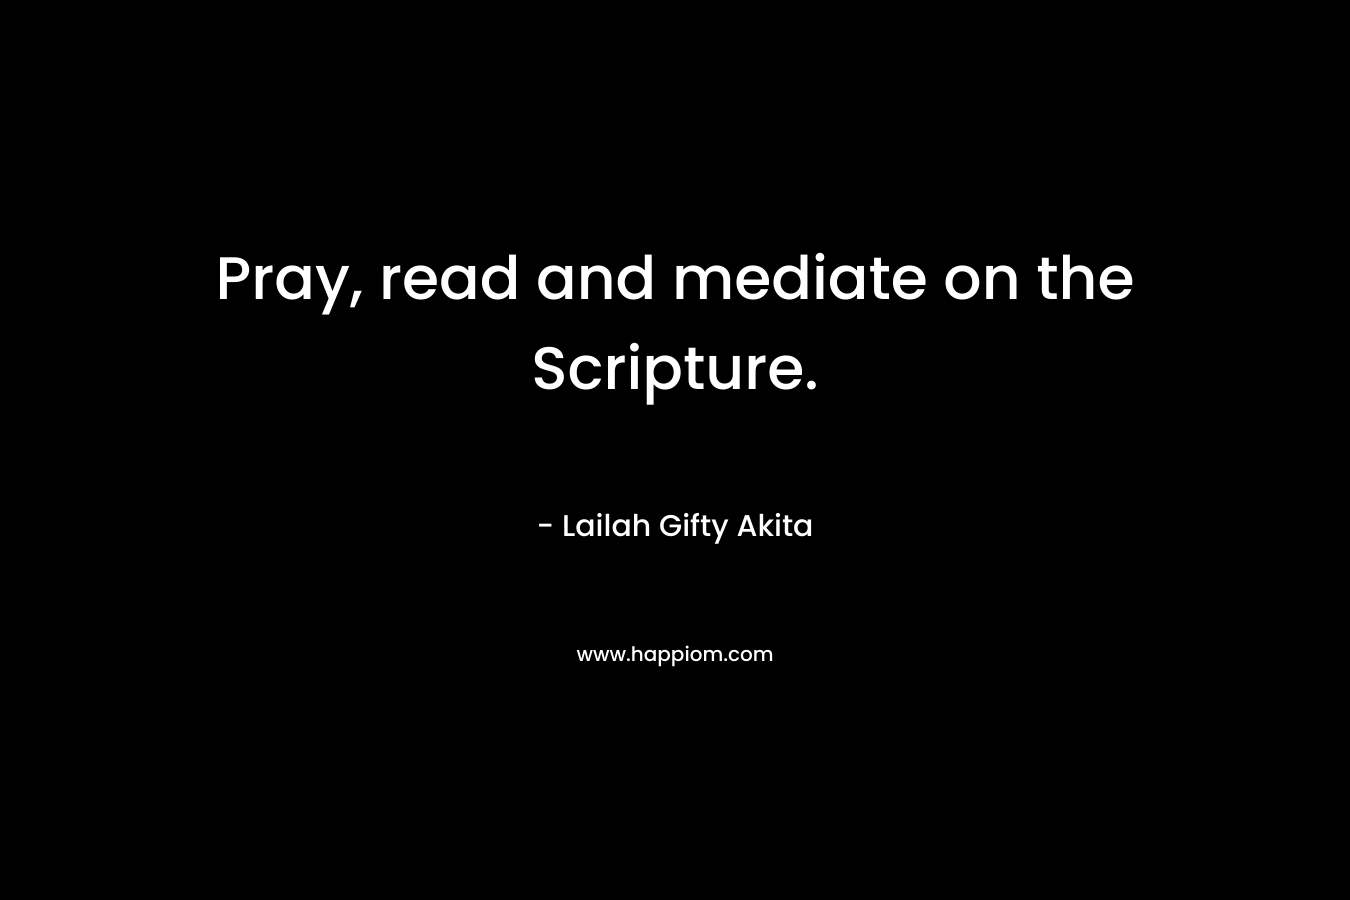 Pray, read and mediate on the Scripture.